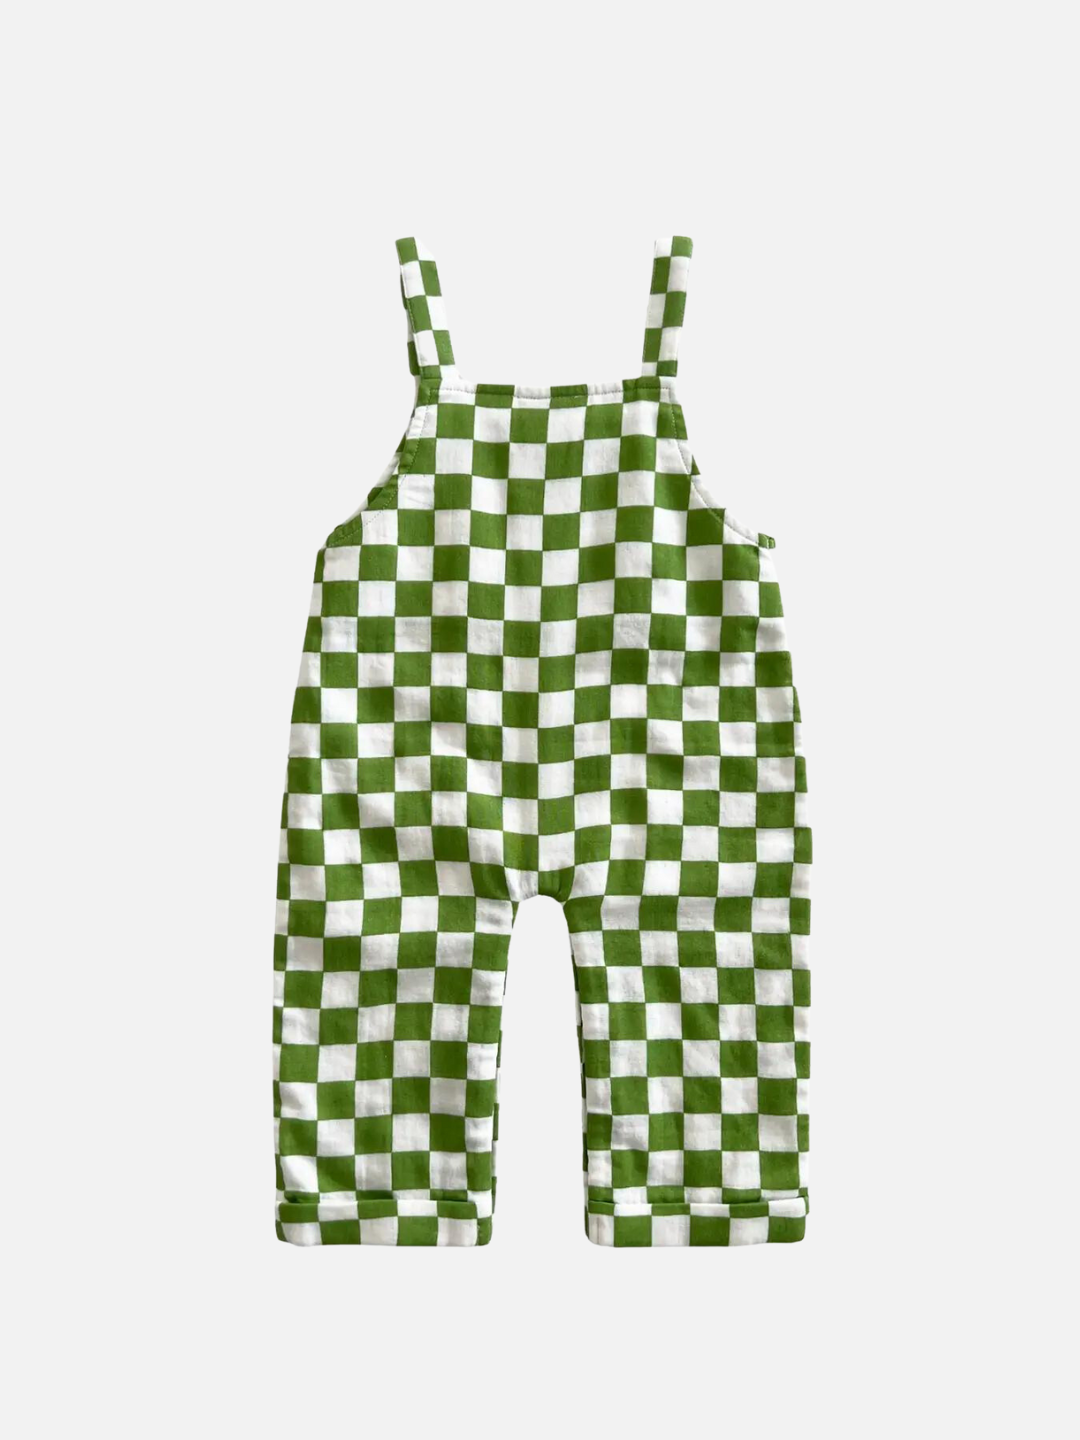 A pair of kids' overalls in grass green and white check, back view